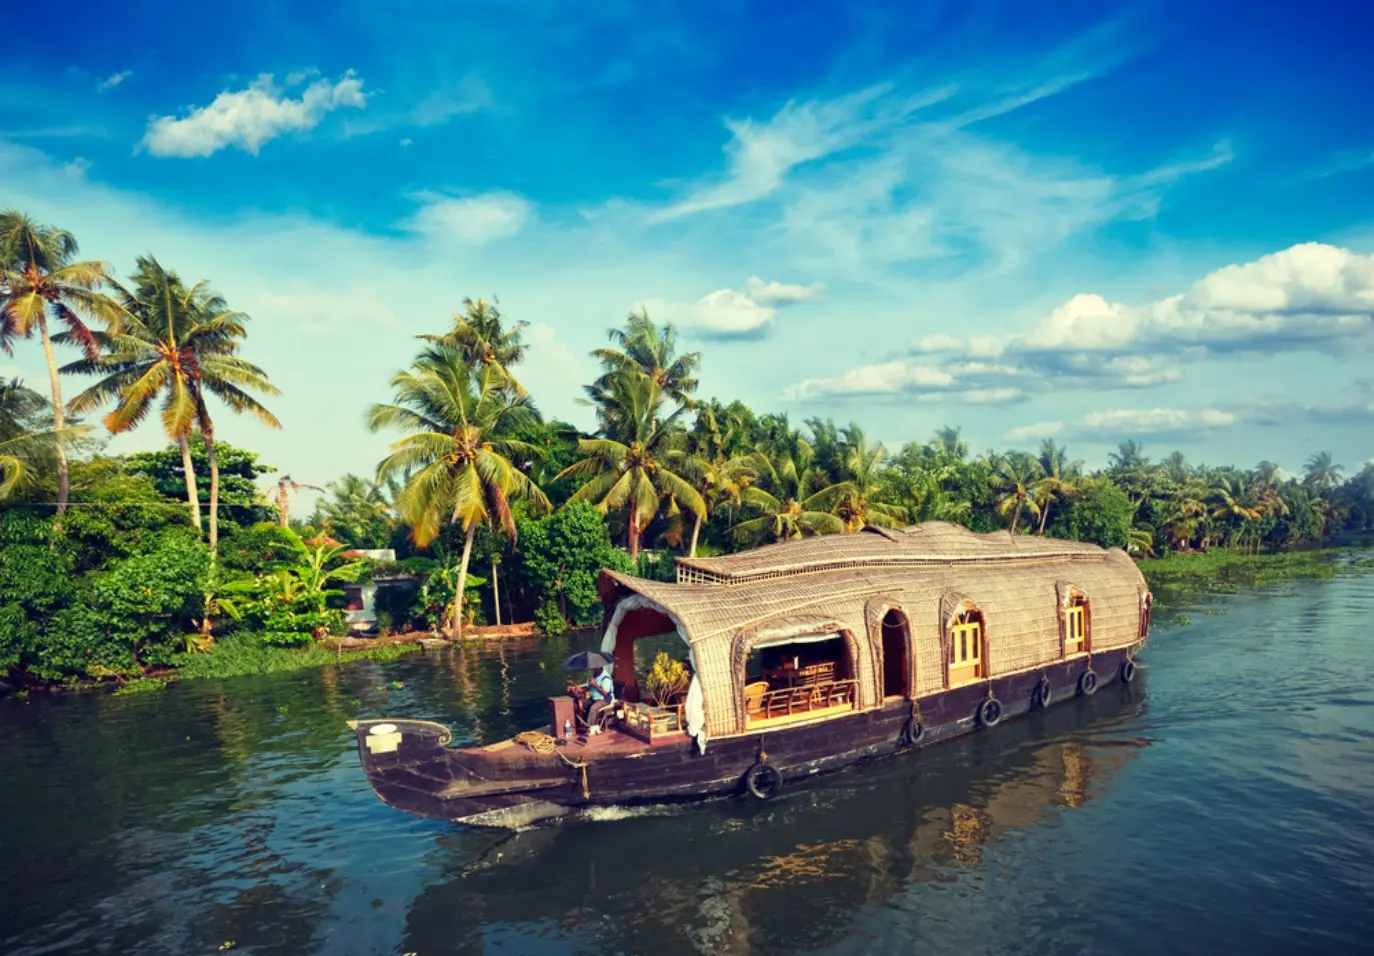 Kerala God's own country